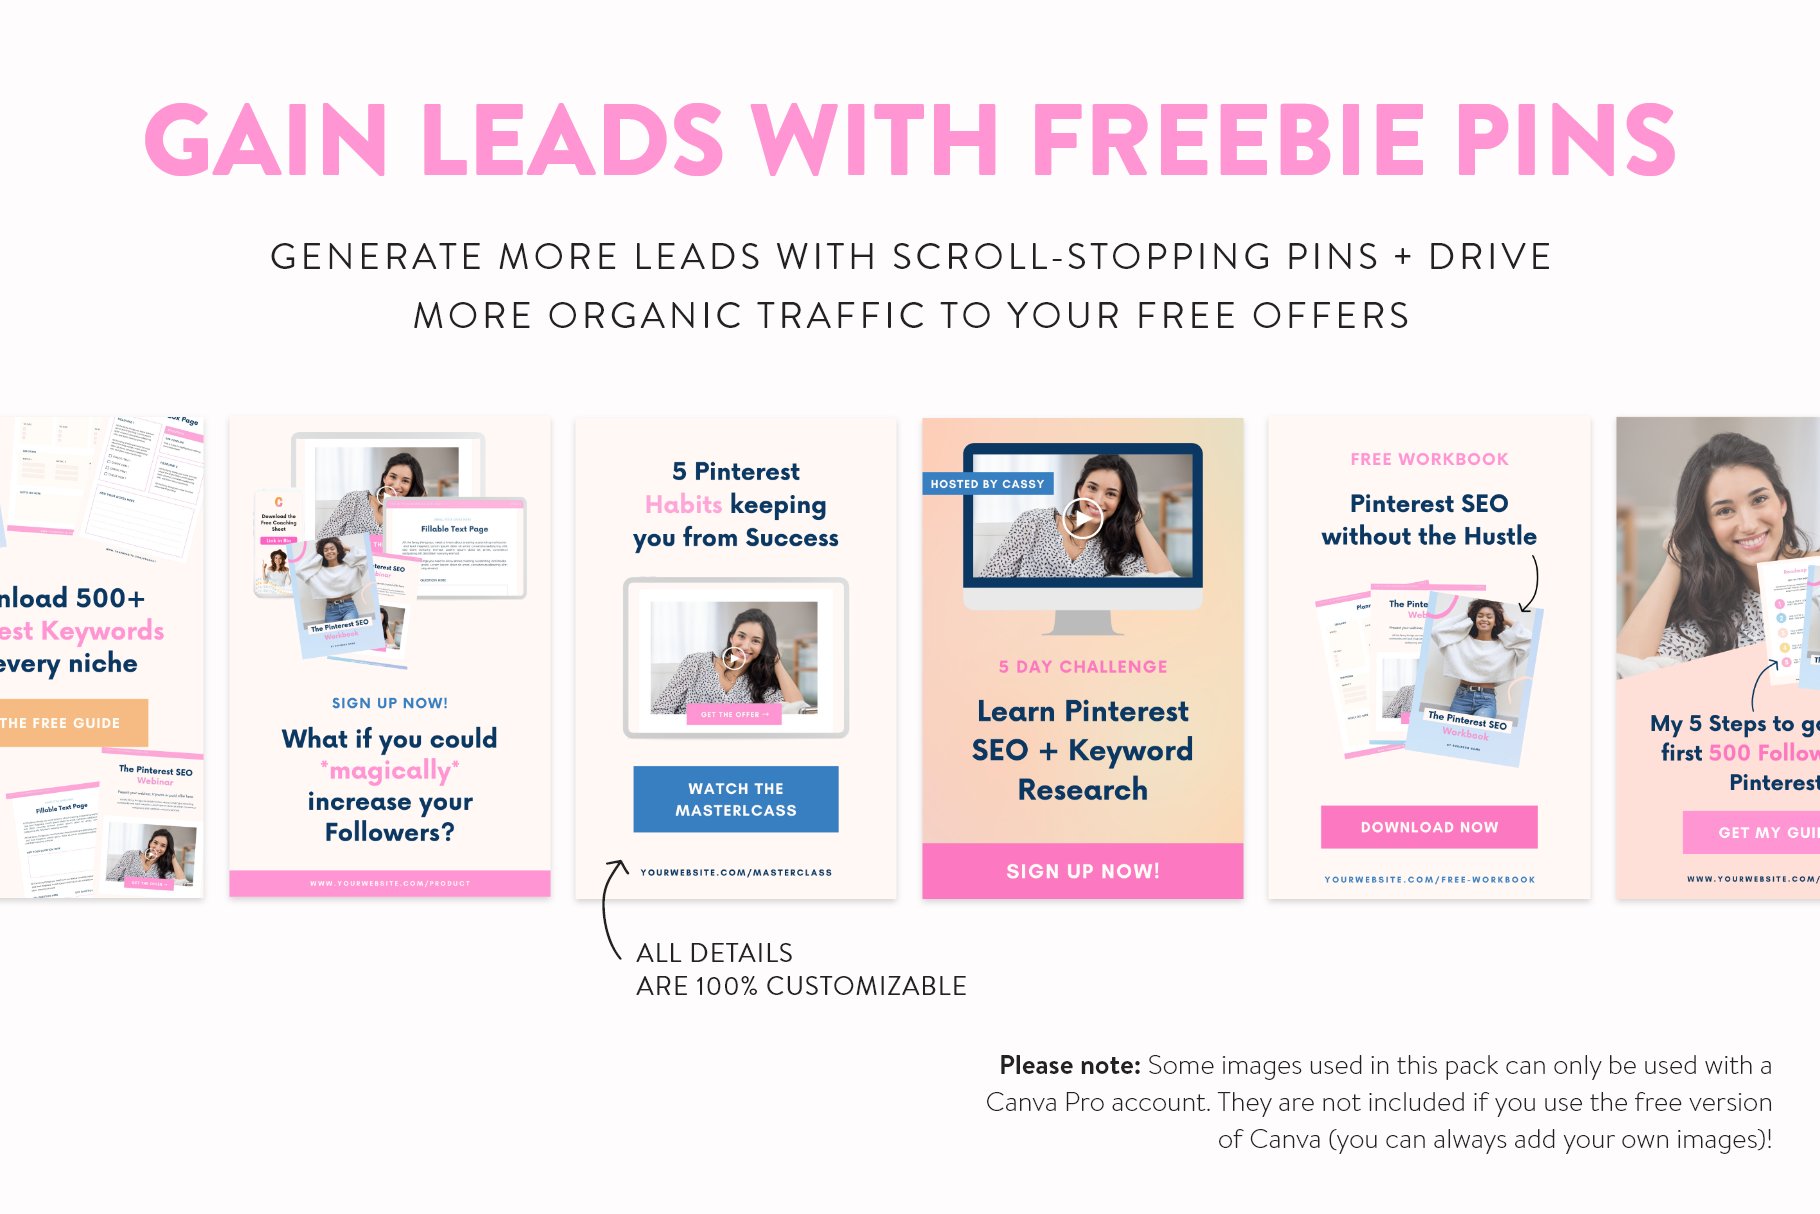 Gain leads with freebie pins.